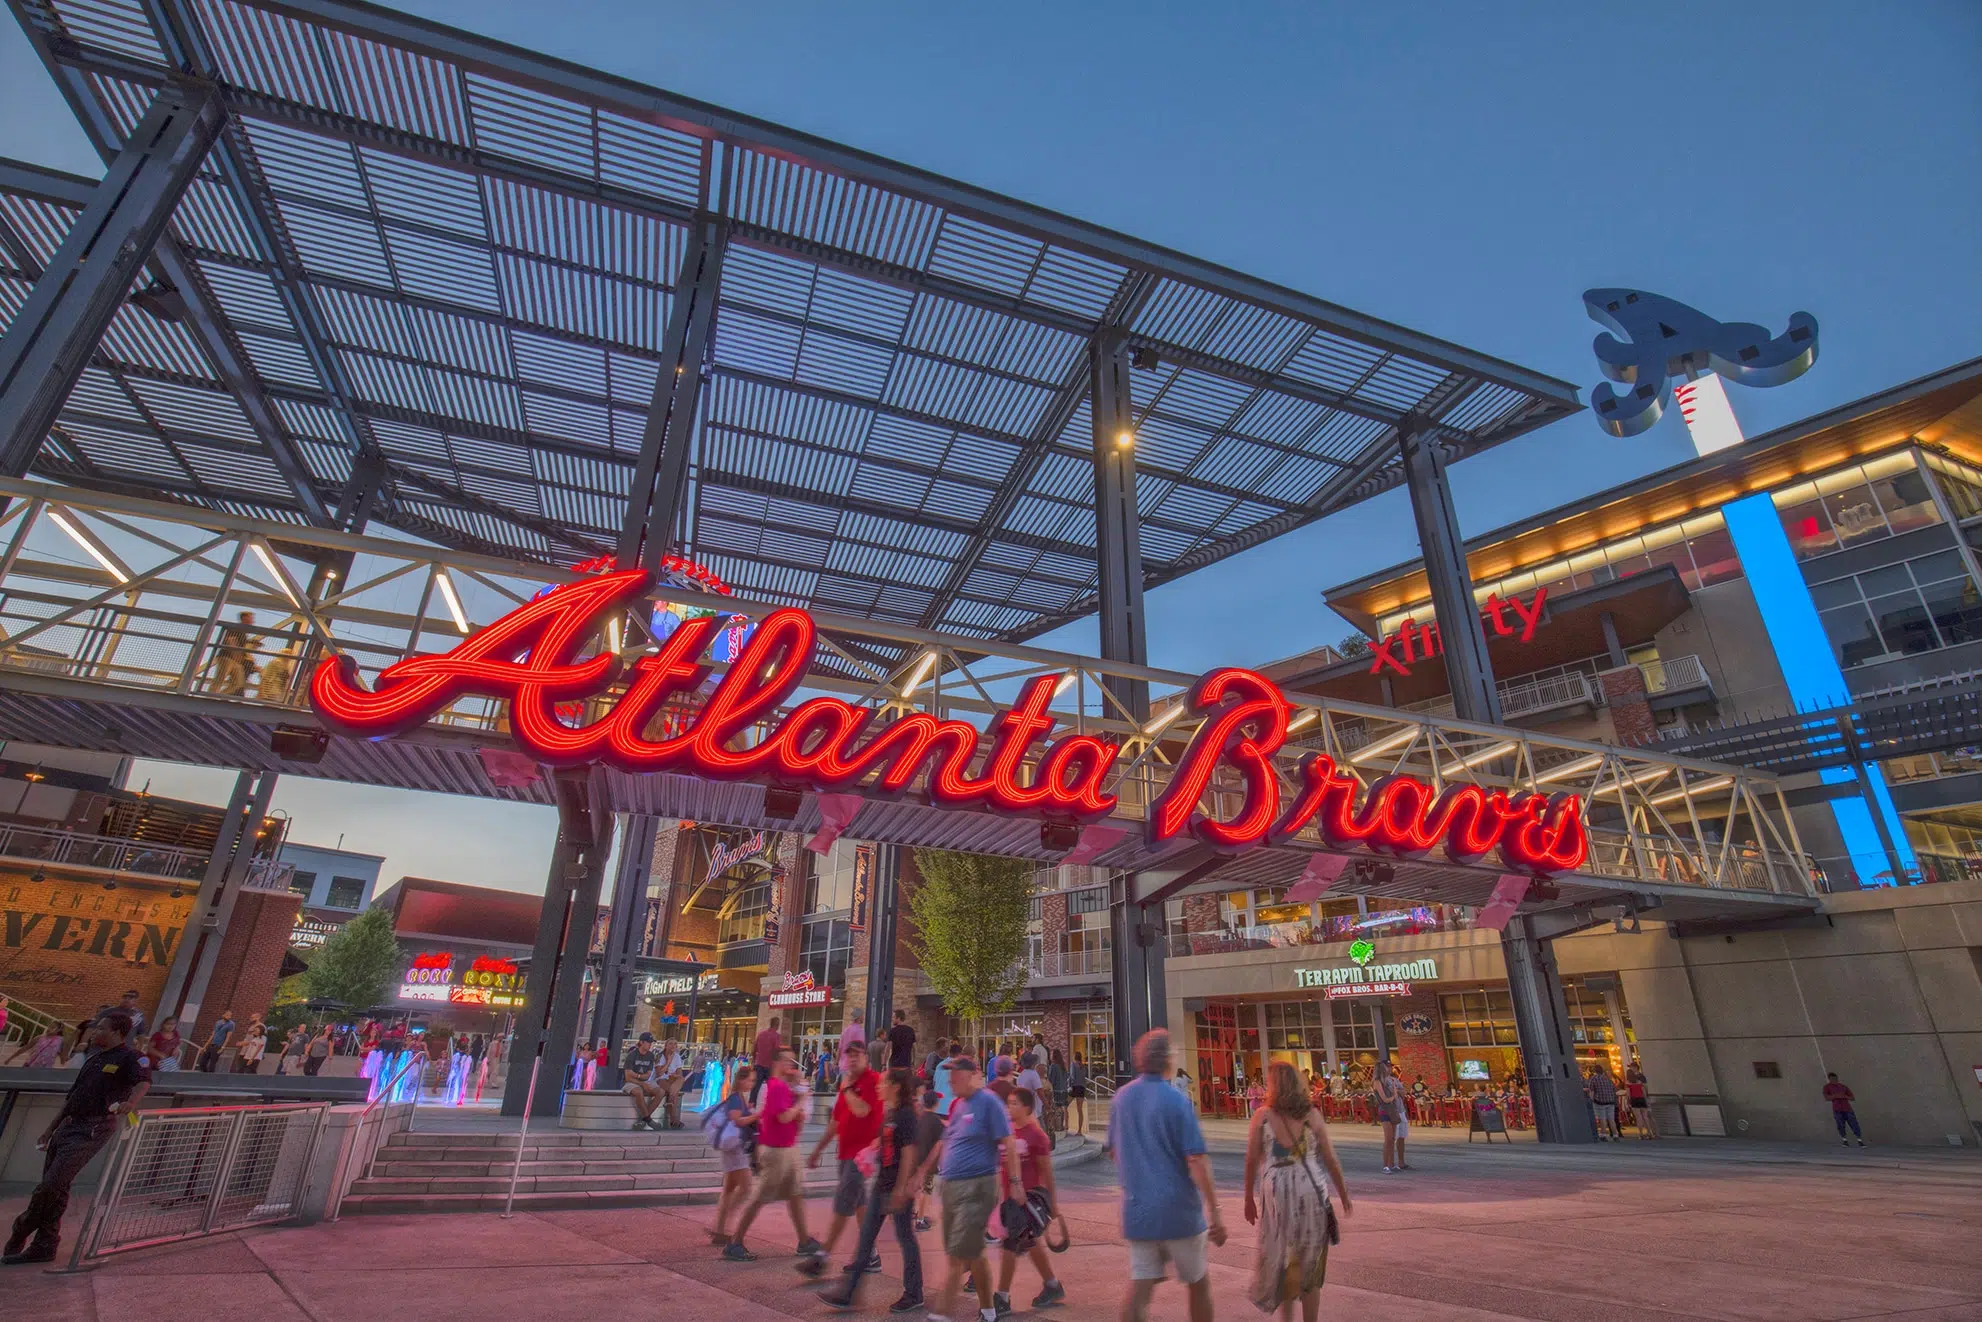 Where to Eat at Atlanta Braves Stadium Truist Park and Battery